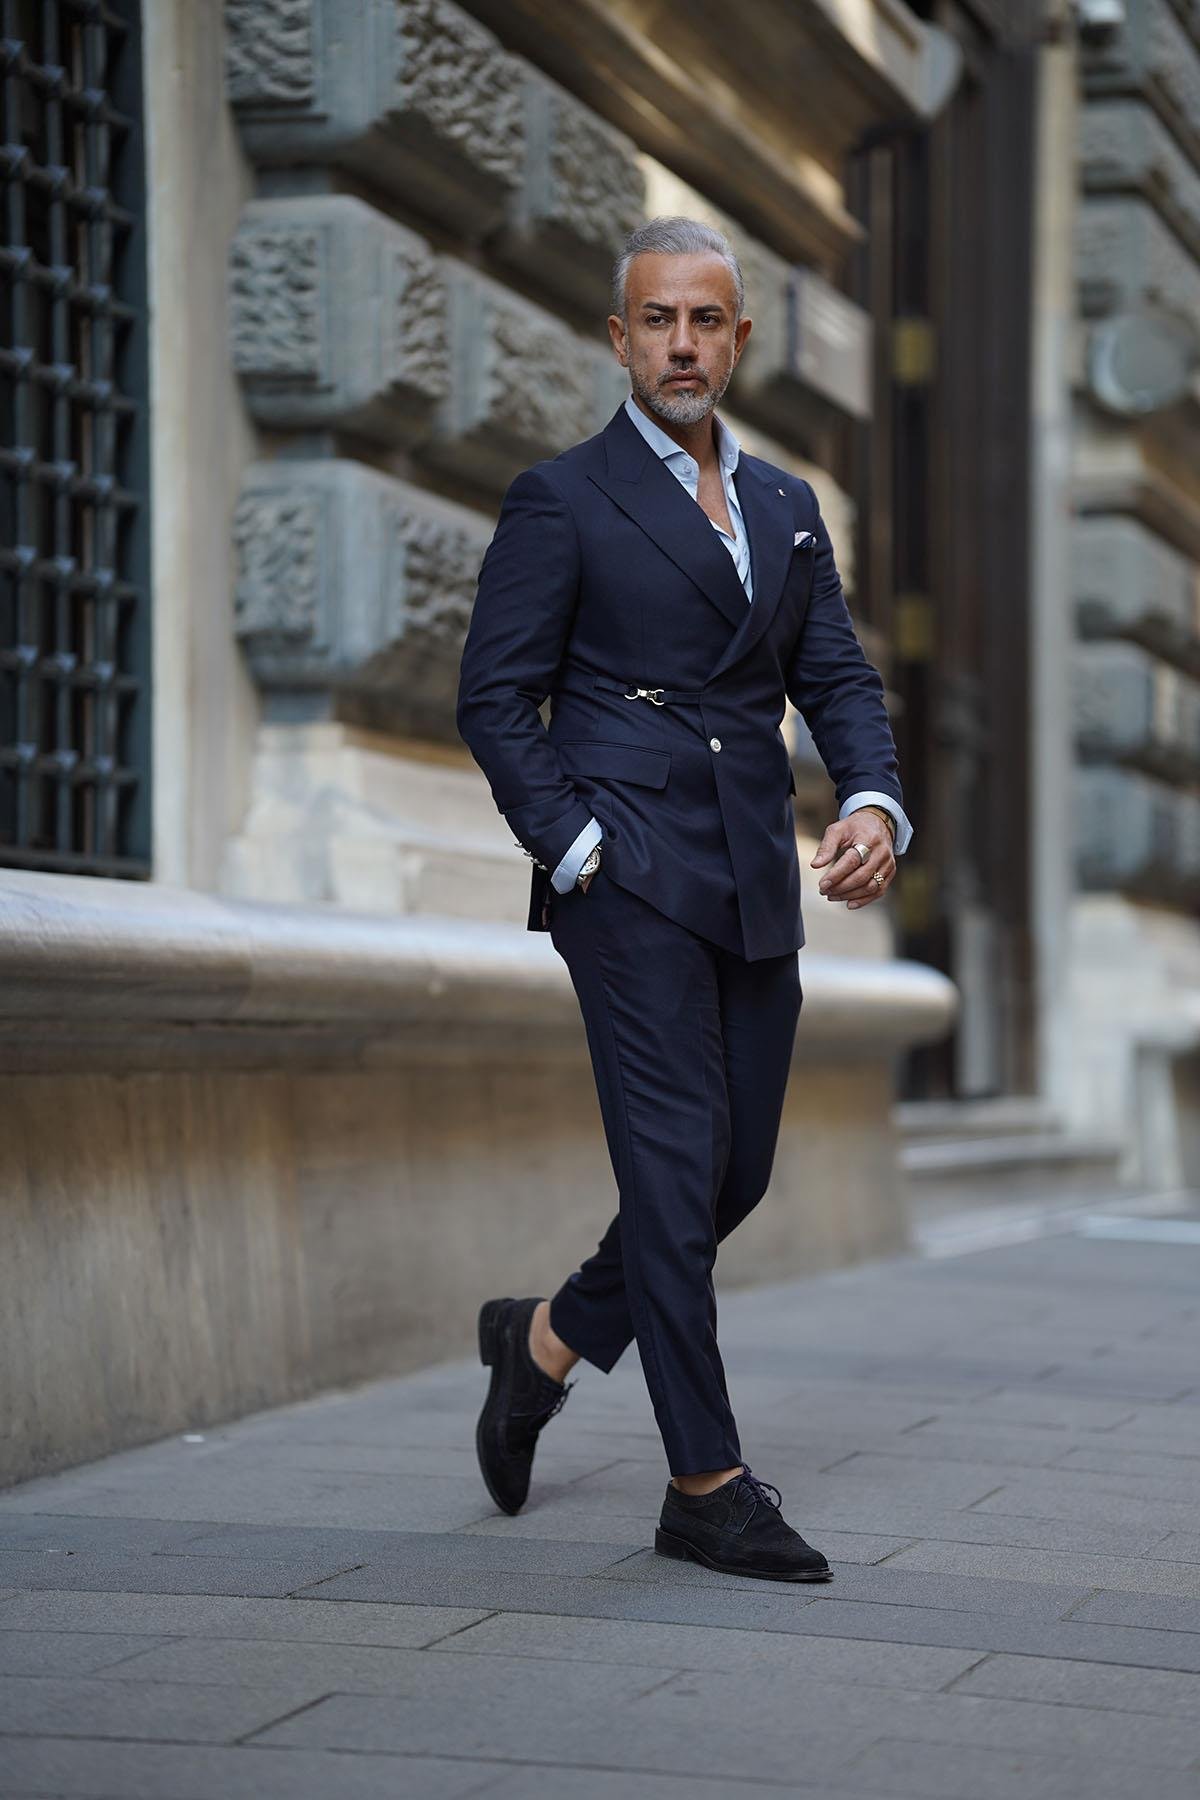 PREMIUM NAVY BLUE SUIT WITH SIDE ACCESSORIES